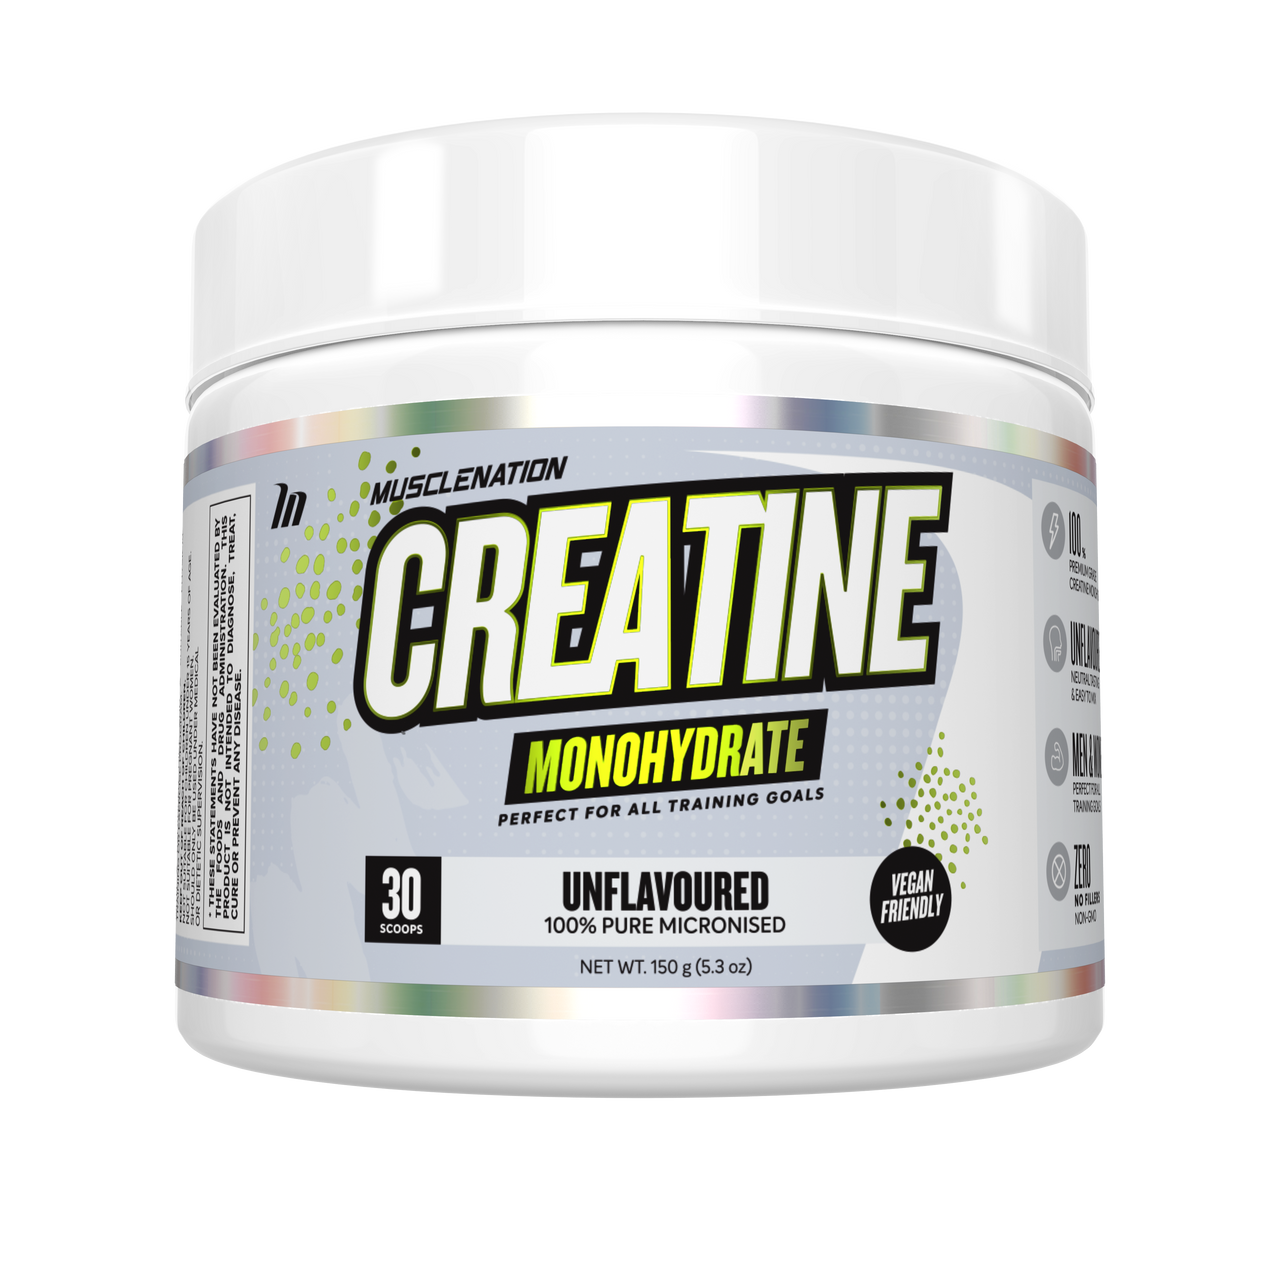 Muscle Nation Creatine Monohydrate - Super Nutrition